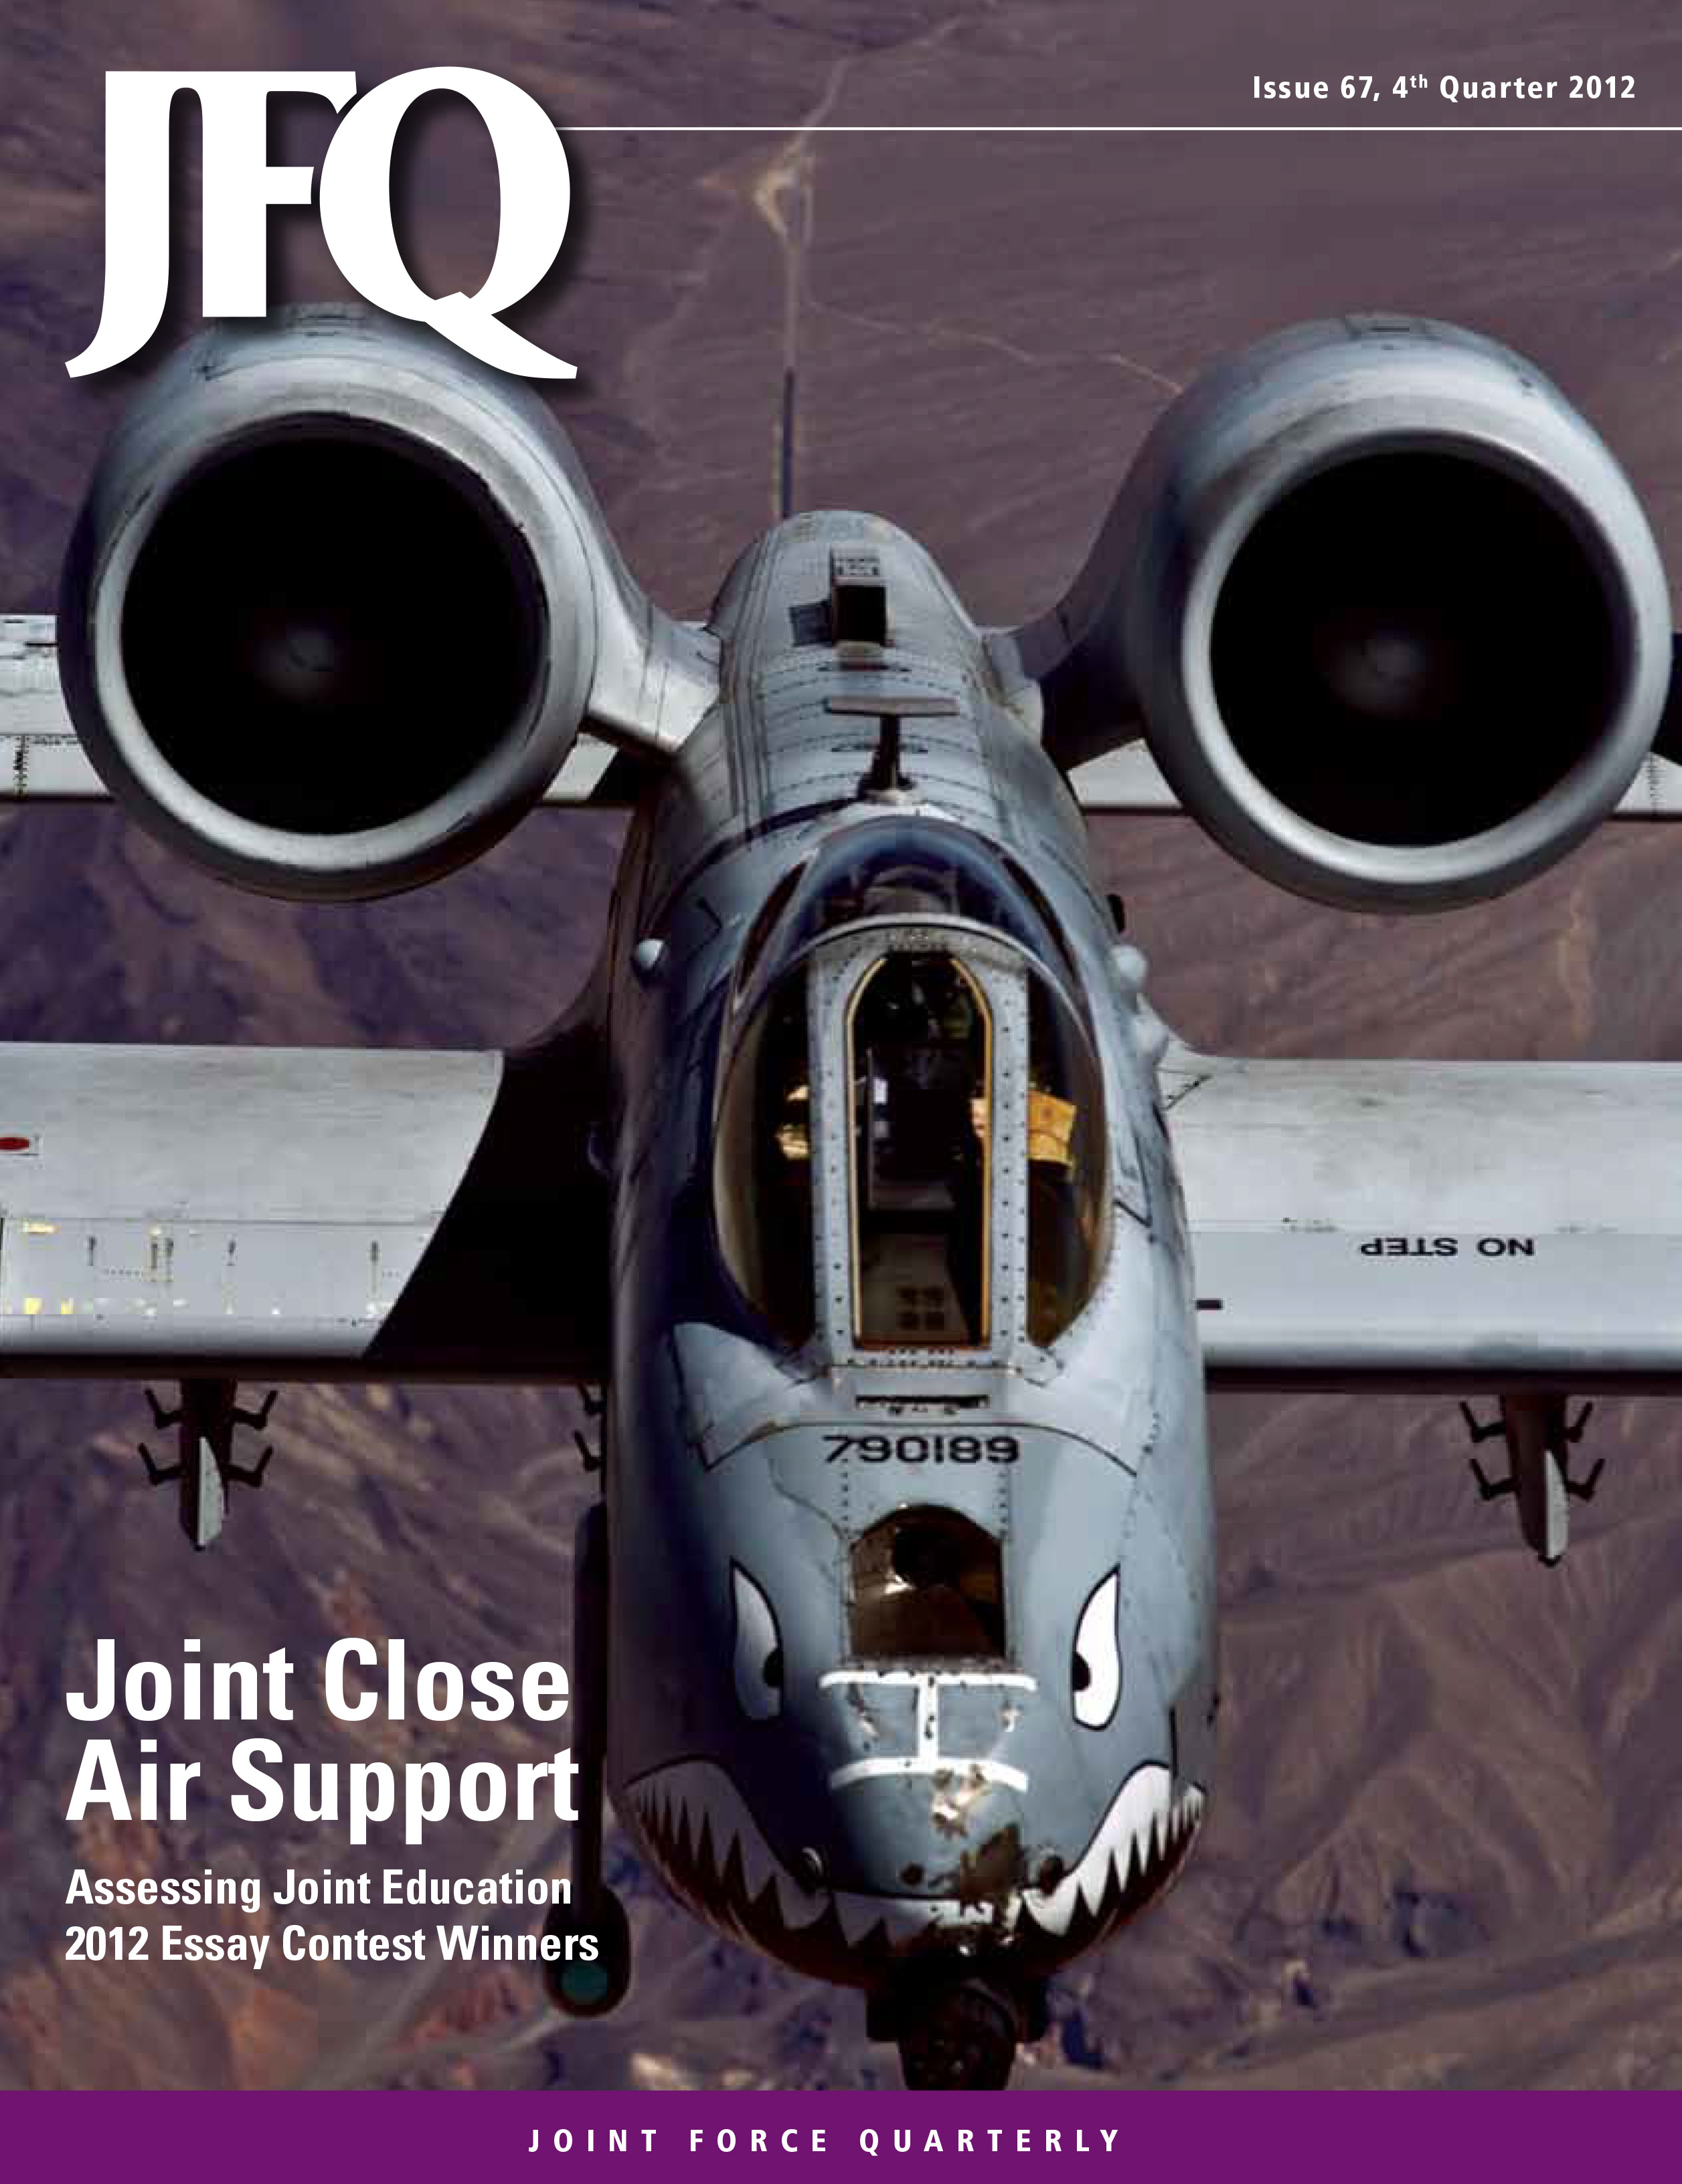 Joint Force Quarterly 67